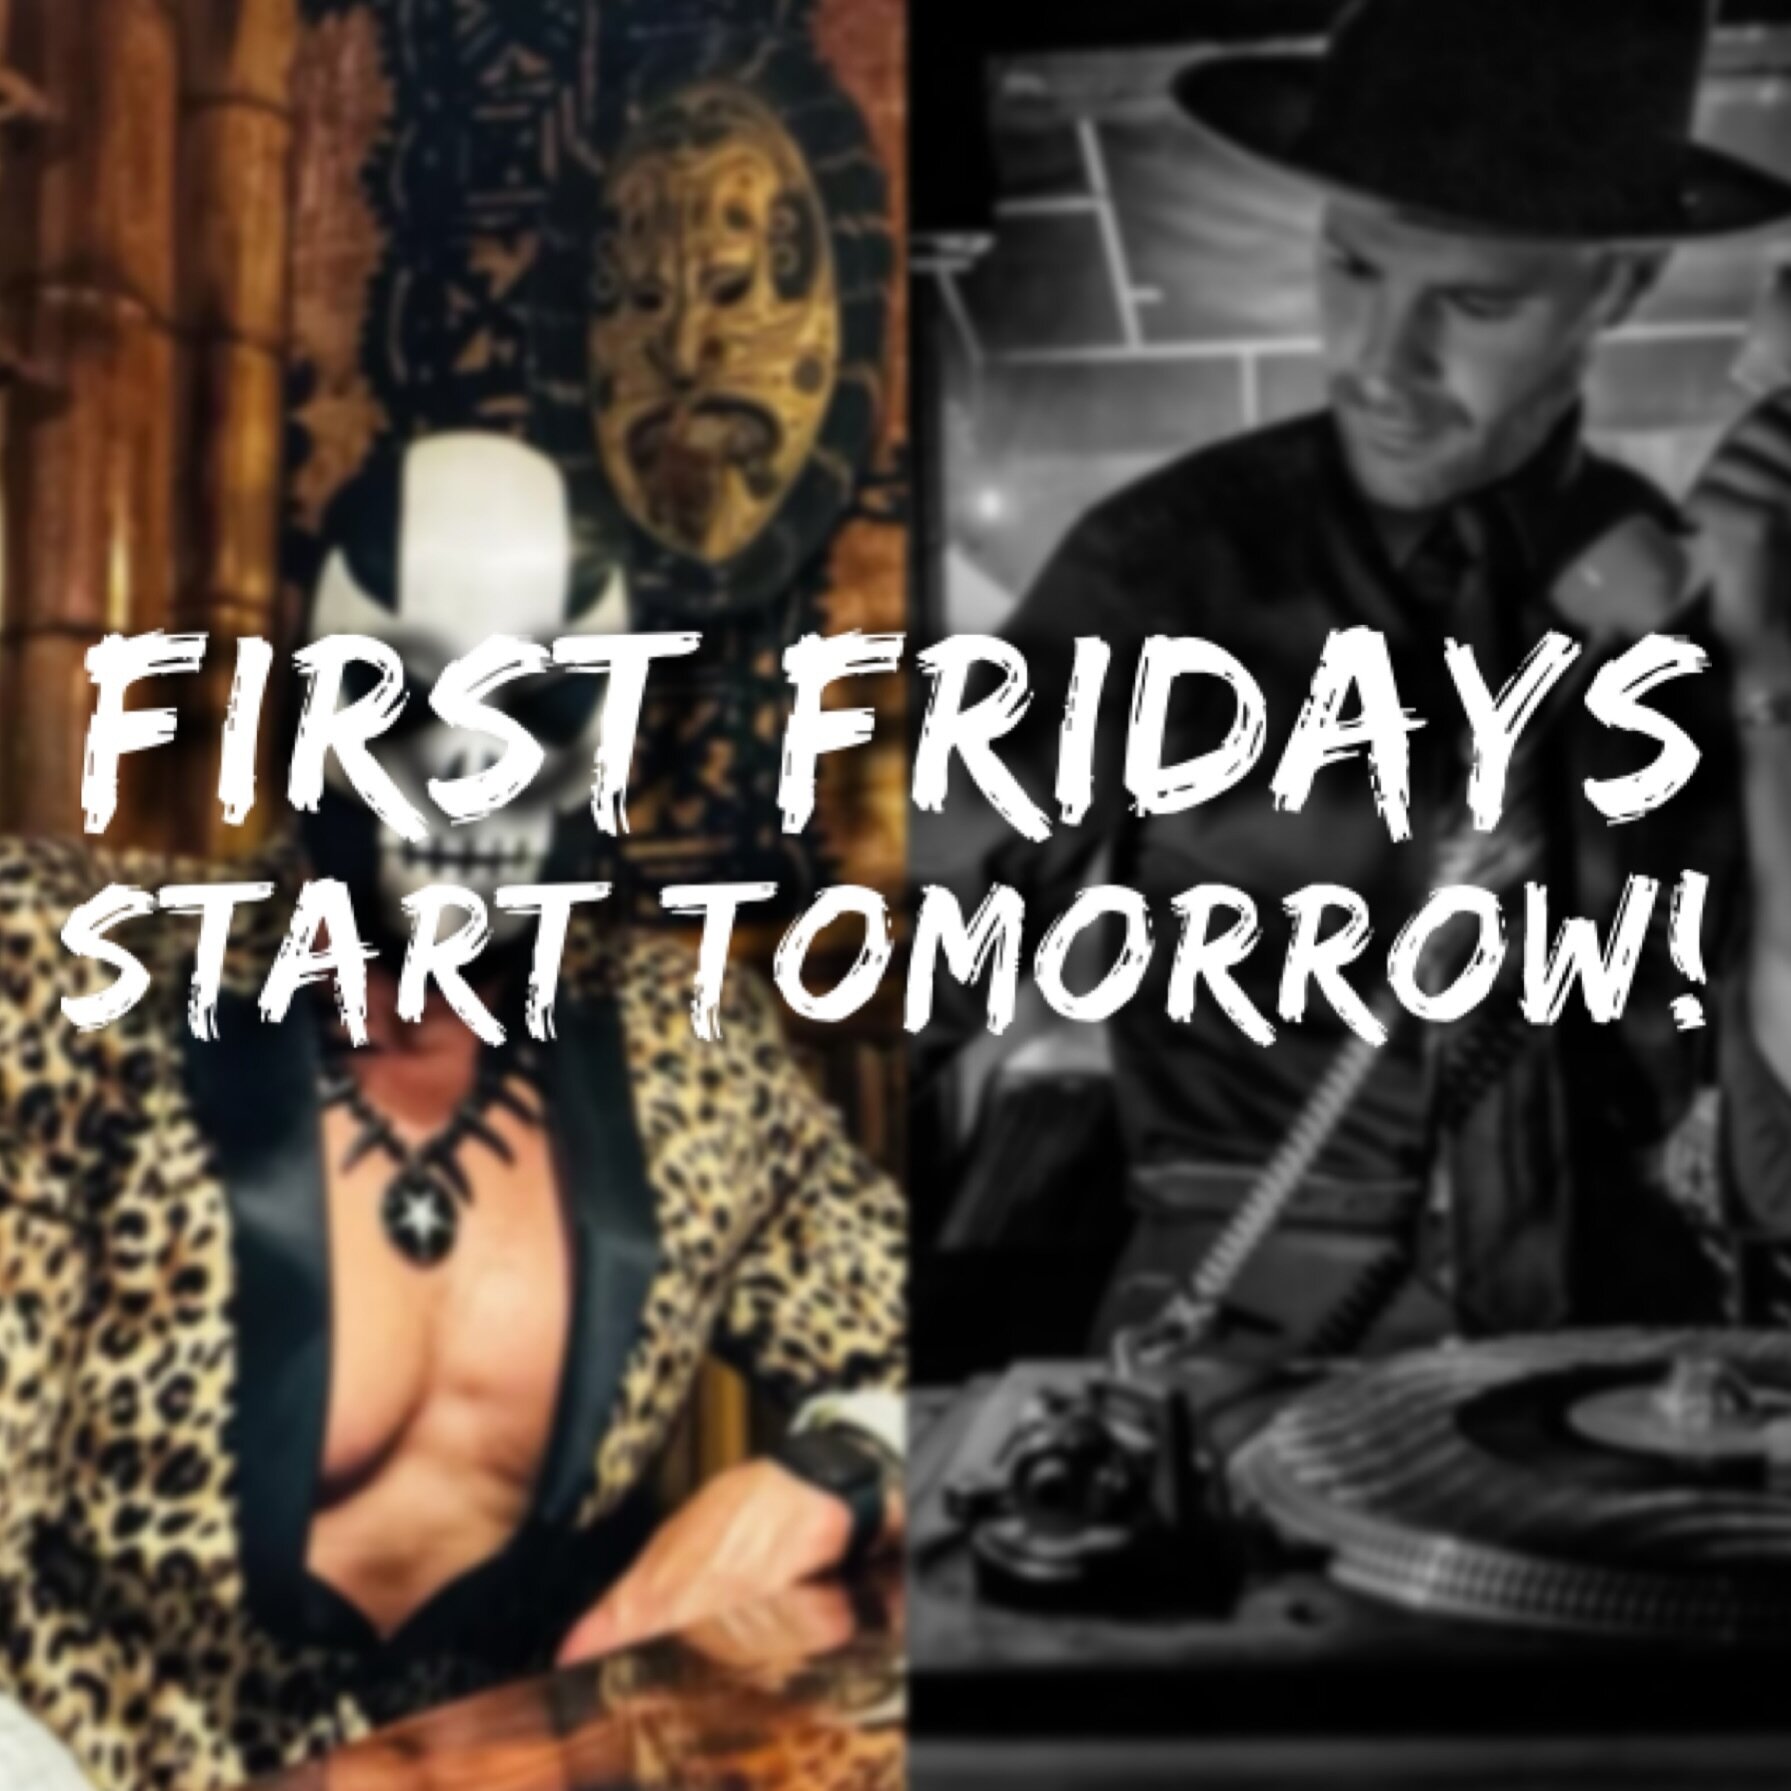 We&rsquo;re so excited for our very first, first Friday!

Every first Friday of the month we&rsquo;re going to be throwing a party with live music and we&rsquo;re excited that @djhitone45 @deadheadrum and @jimmypsycho will be playing the first one! 
